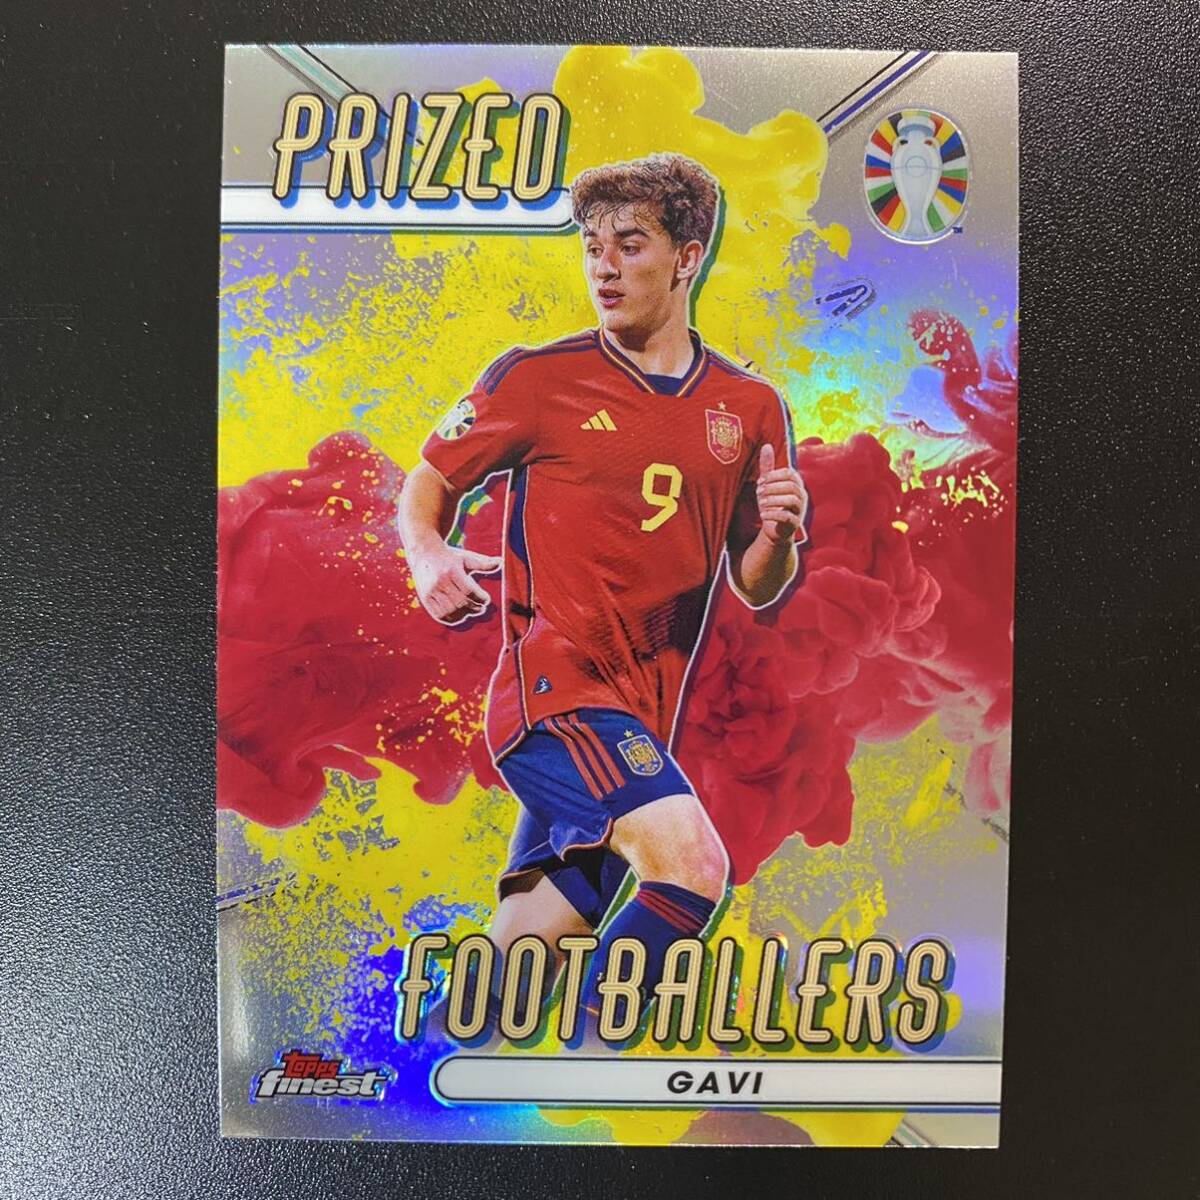 2023-24 Topps Finest Euro Gavi Prized Footballers Yellow Red Fusion Case Hit SSP(1:283) ガビの画像1